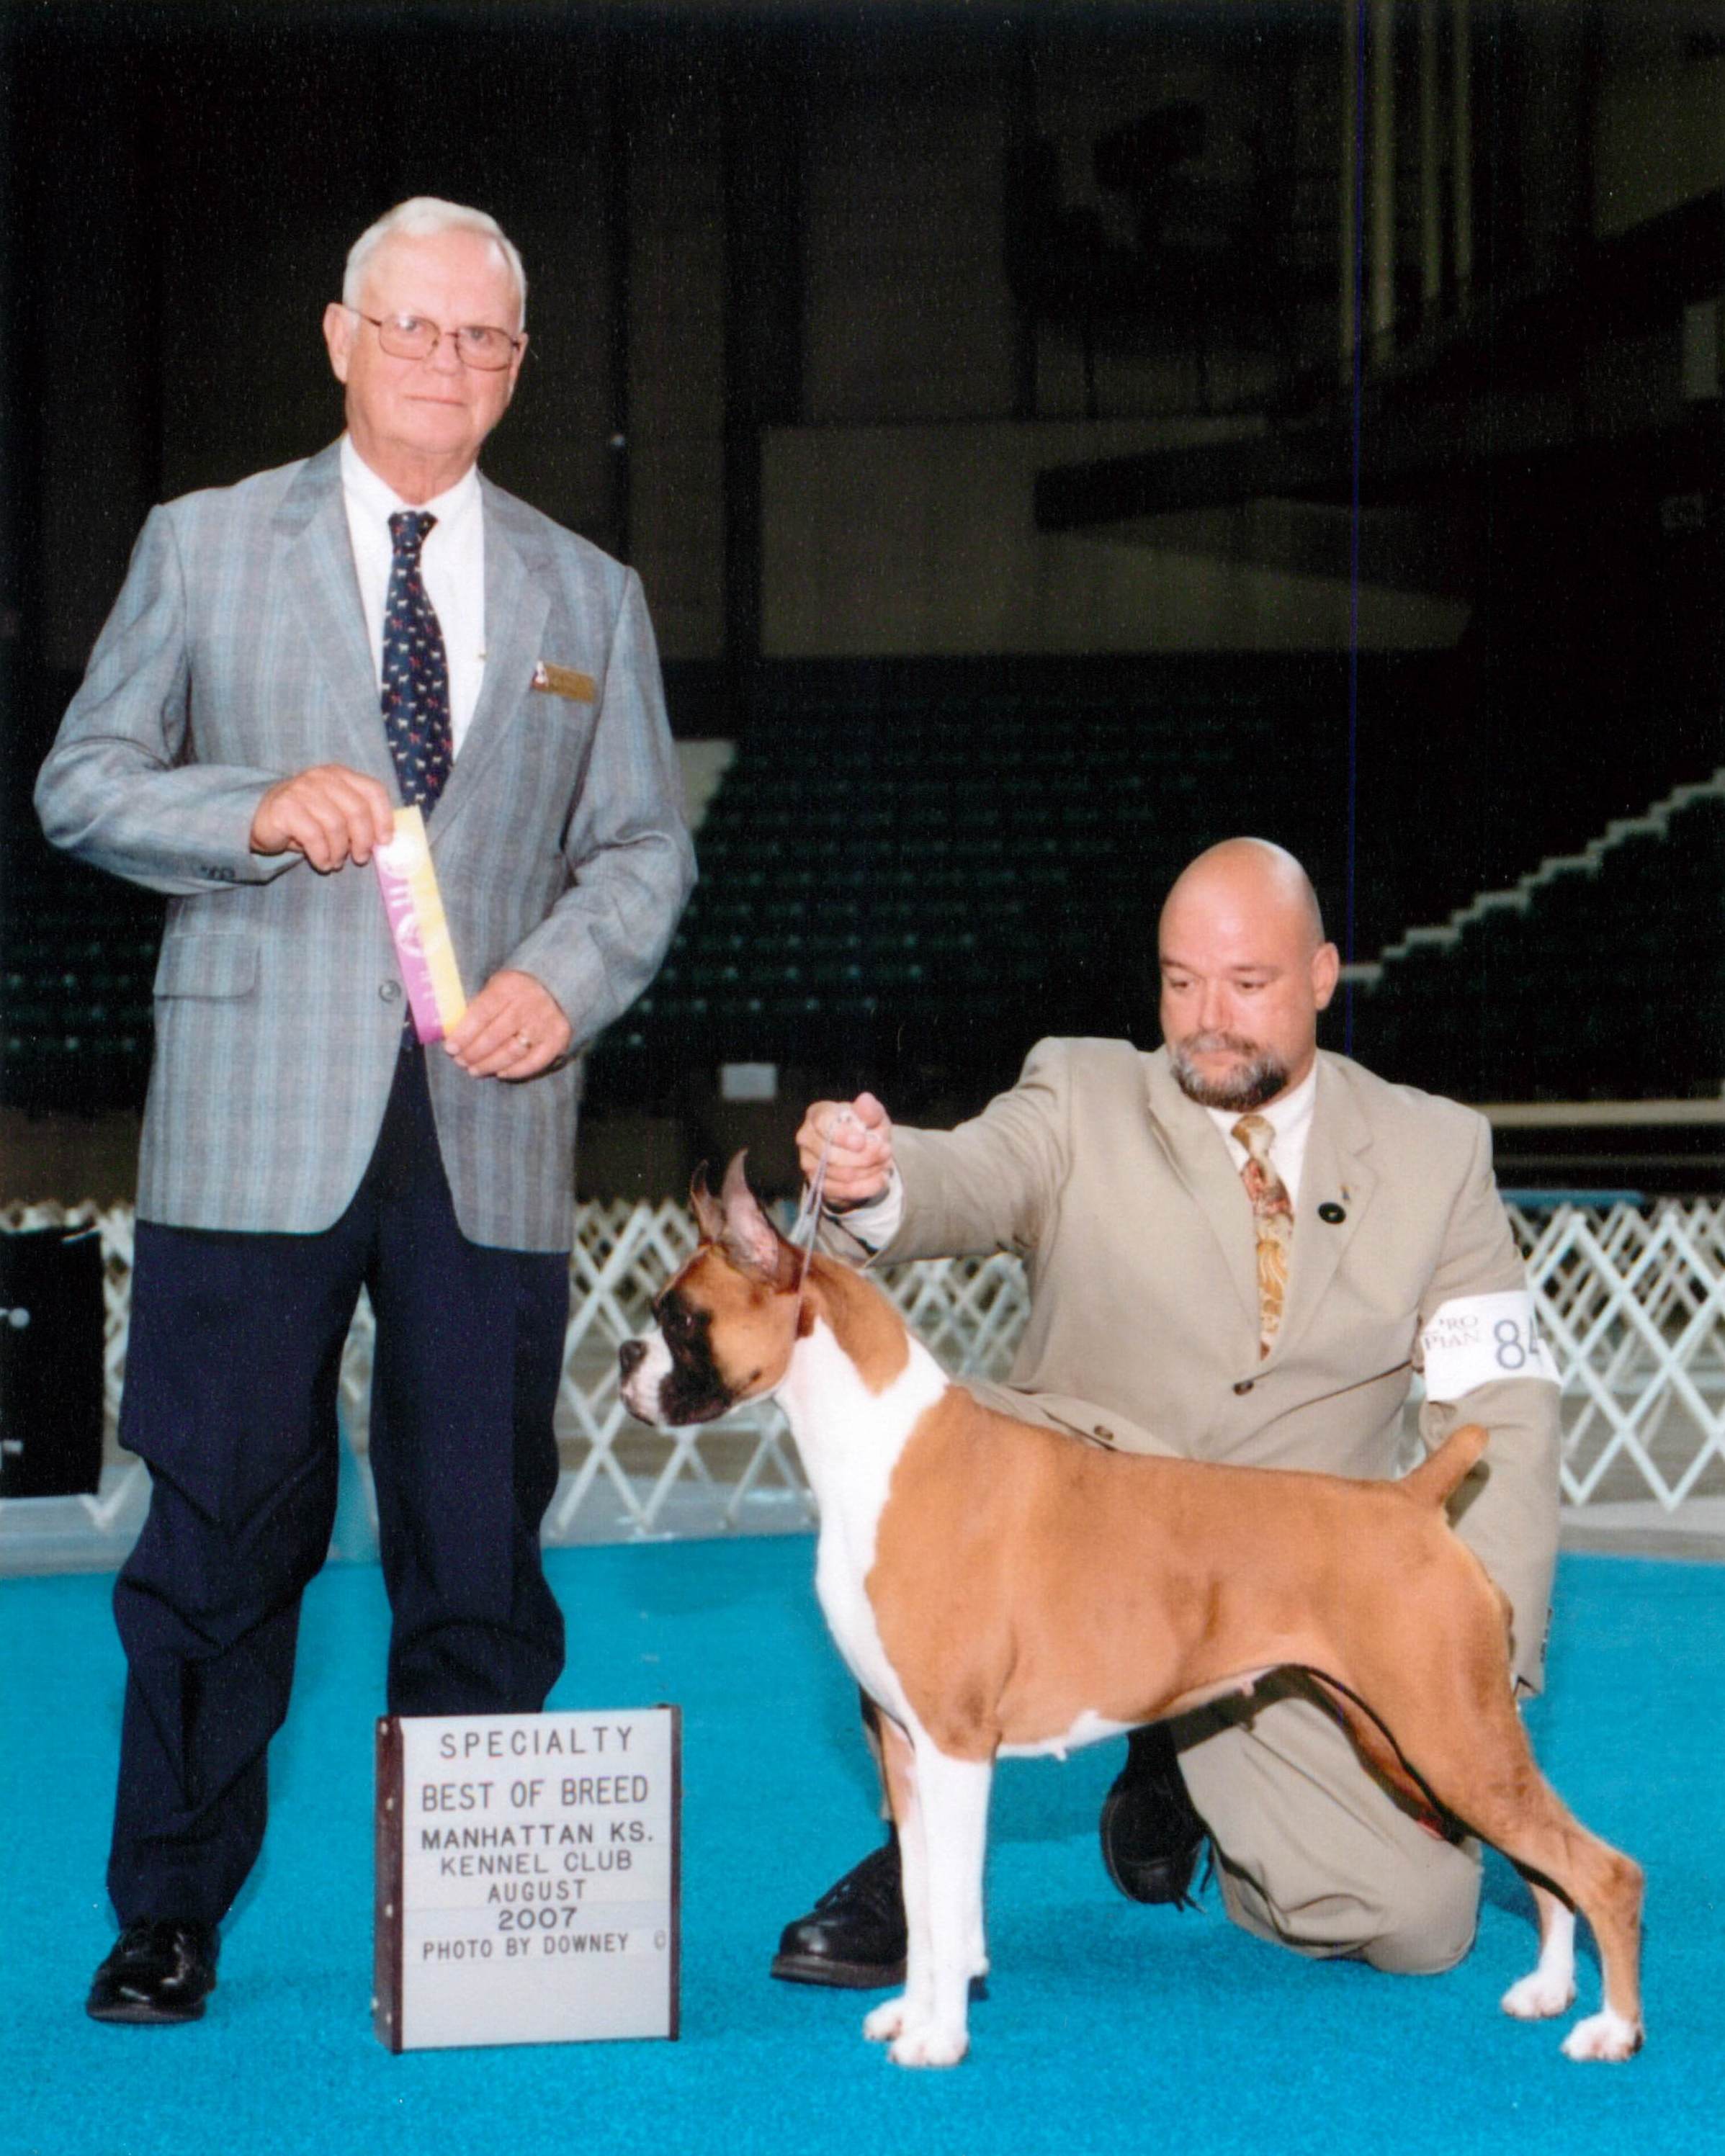 Best of Breed @ 2007 Specialty Show #1